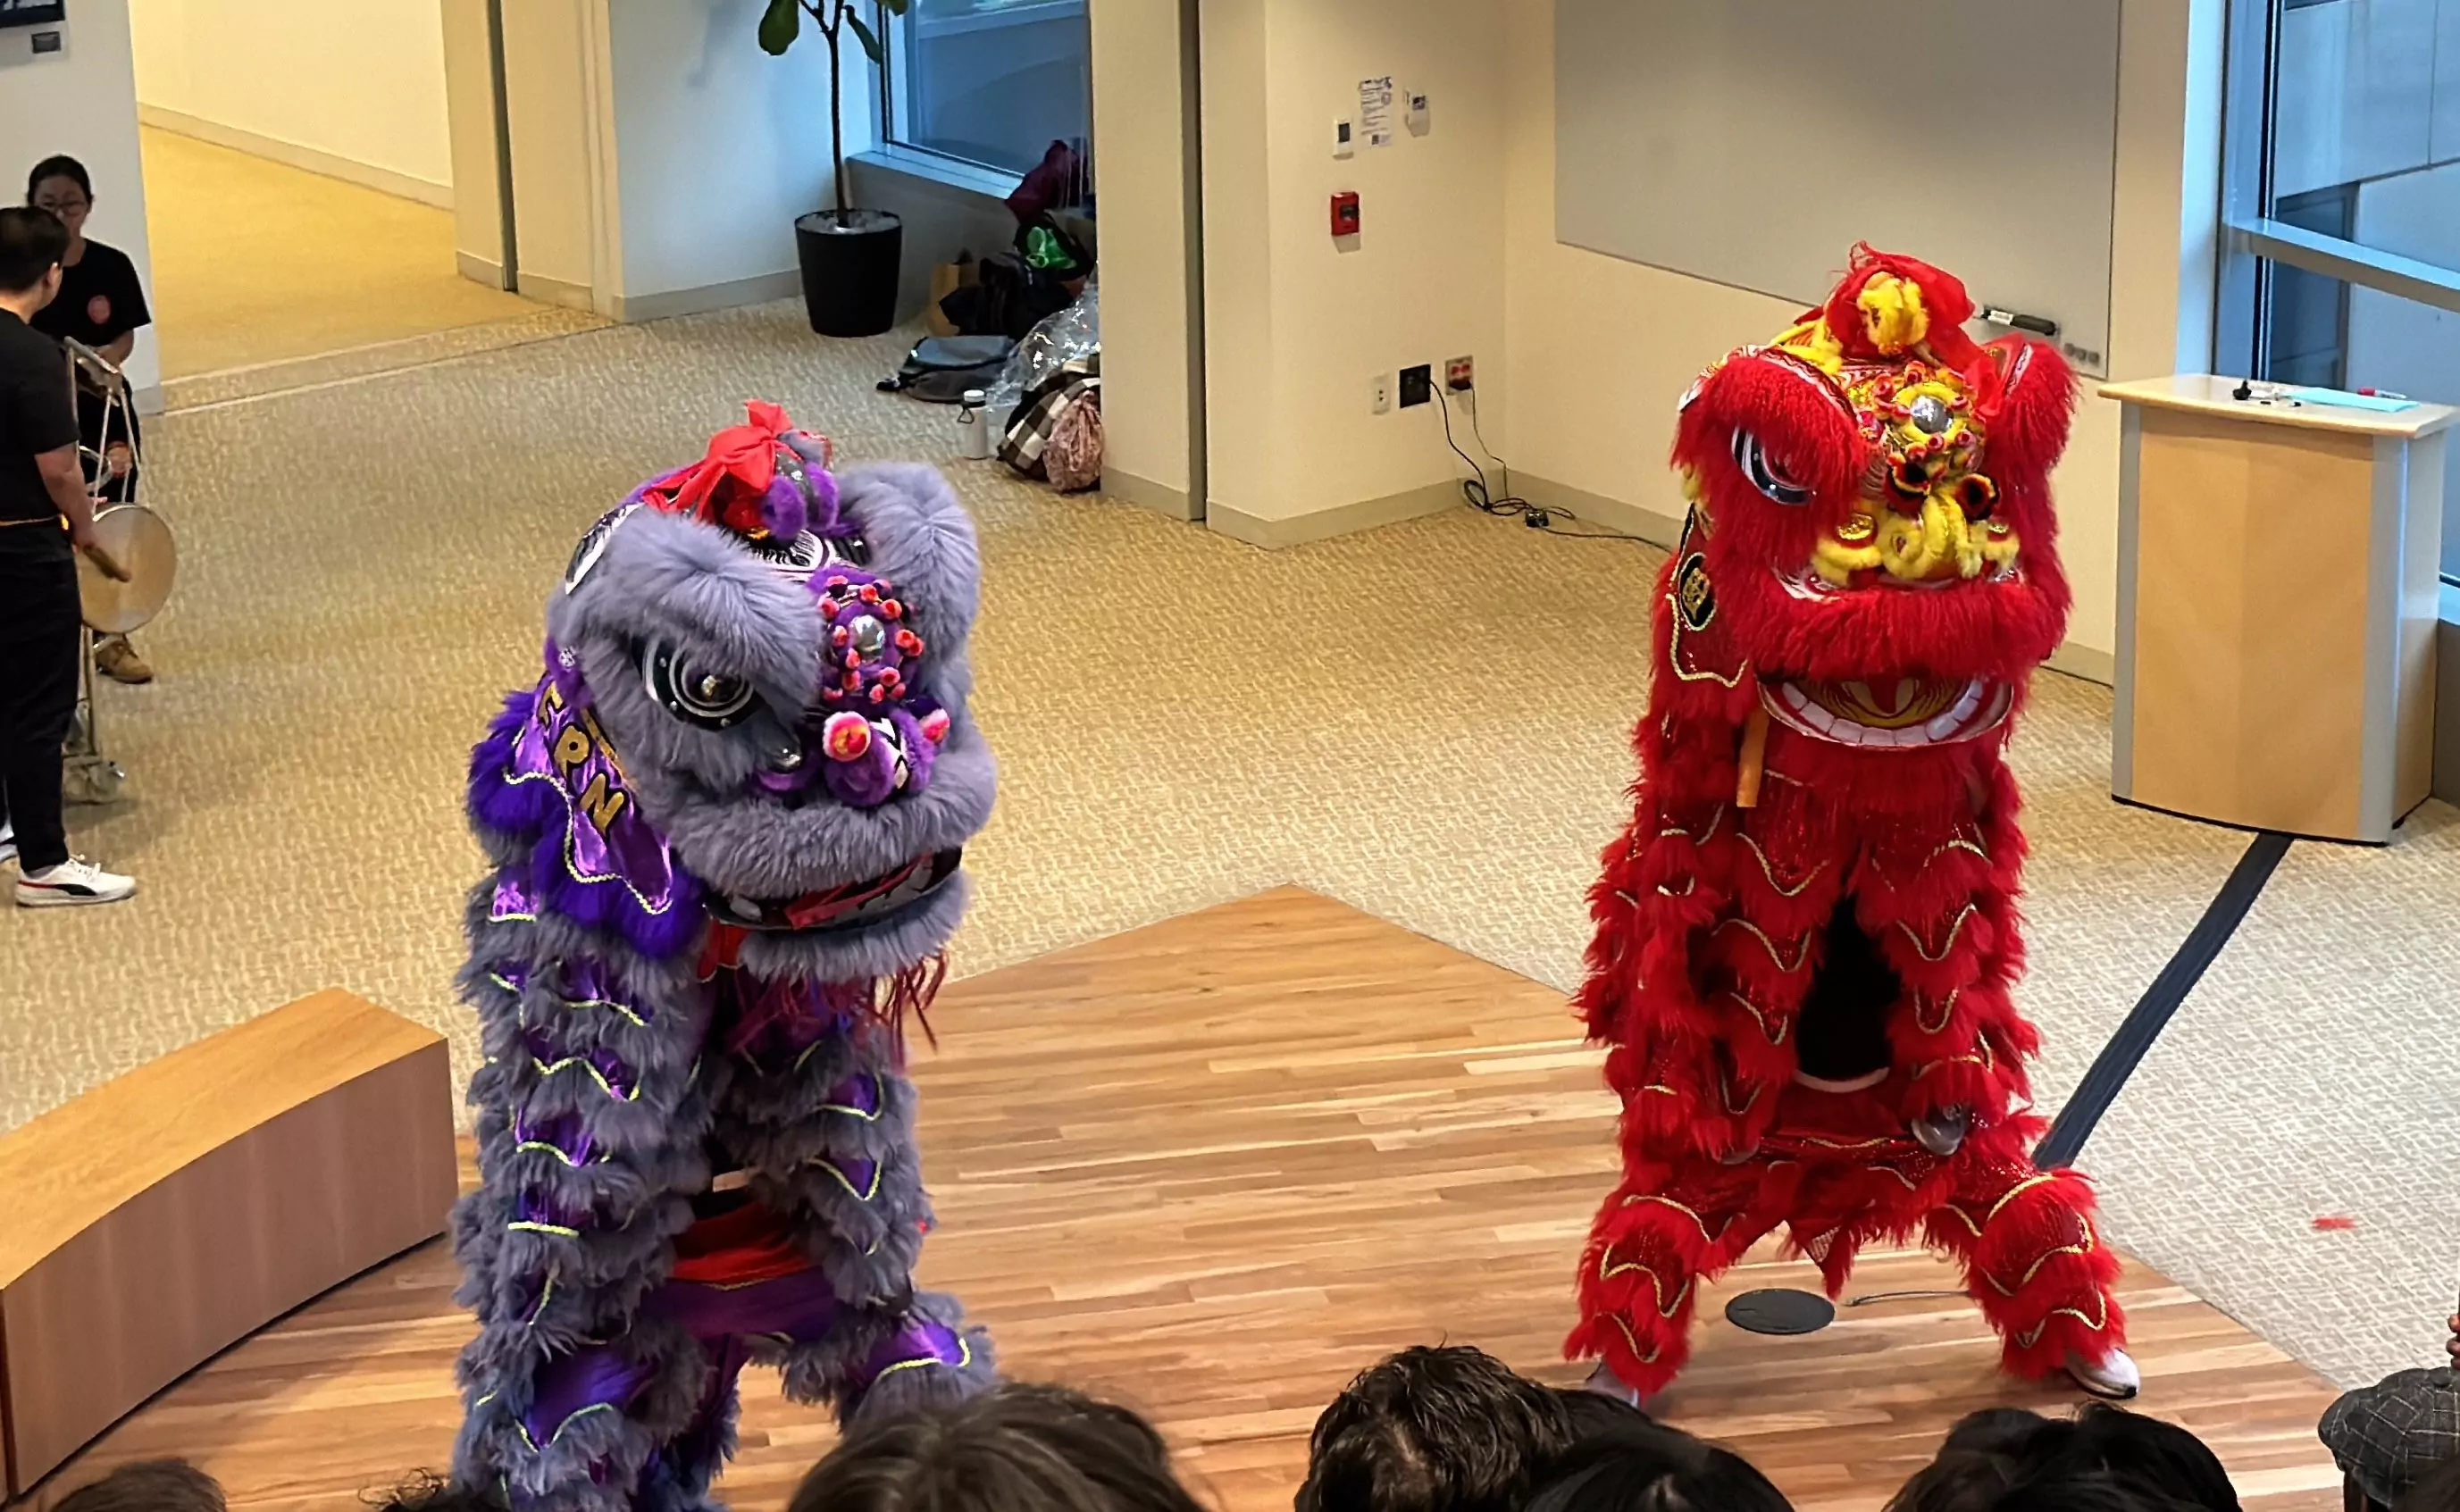 Lion Dance Performance at Broad Institute of MIT and Harvard